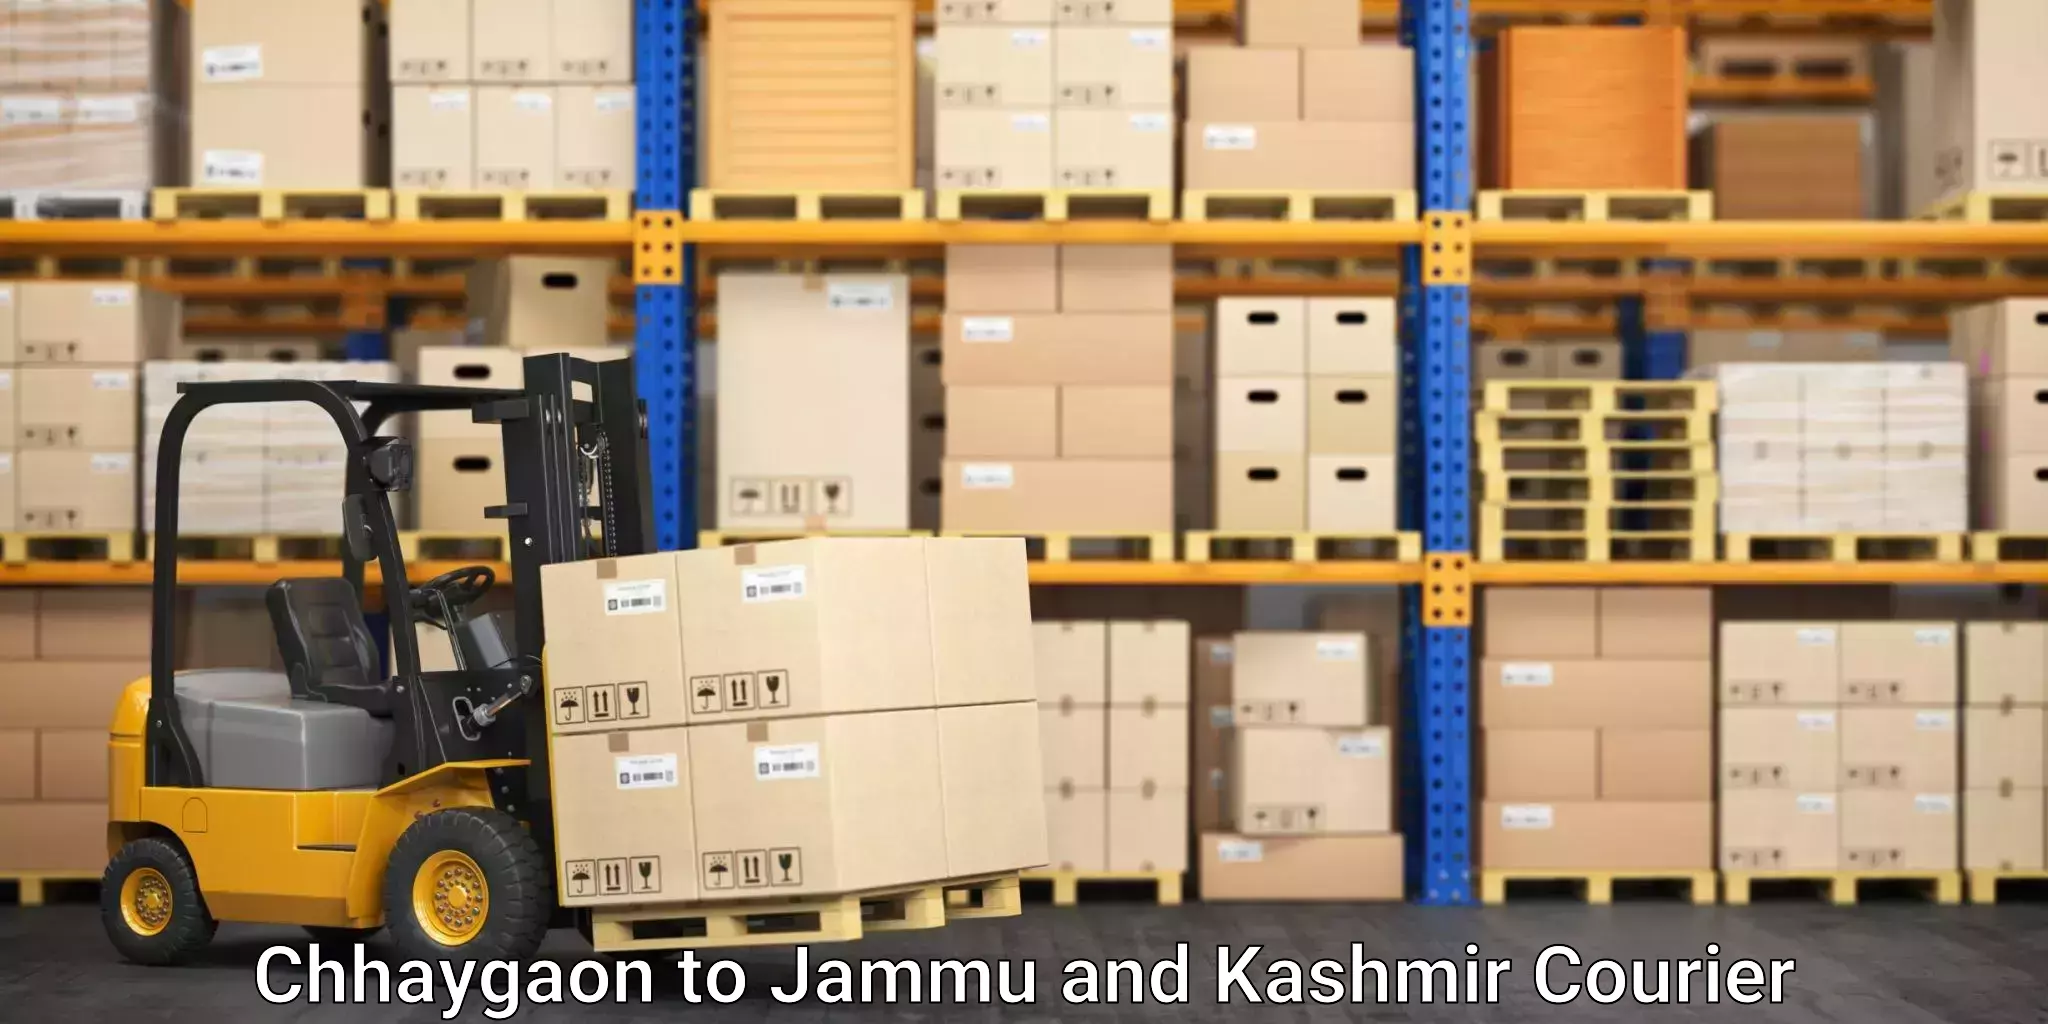 Nationwide shipping capabilities Chhaygaon to Udhampur